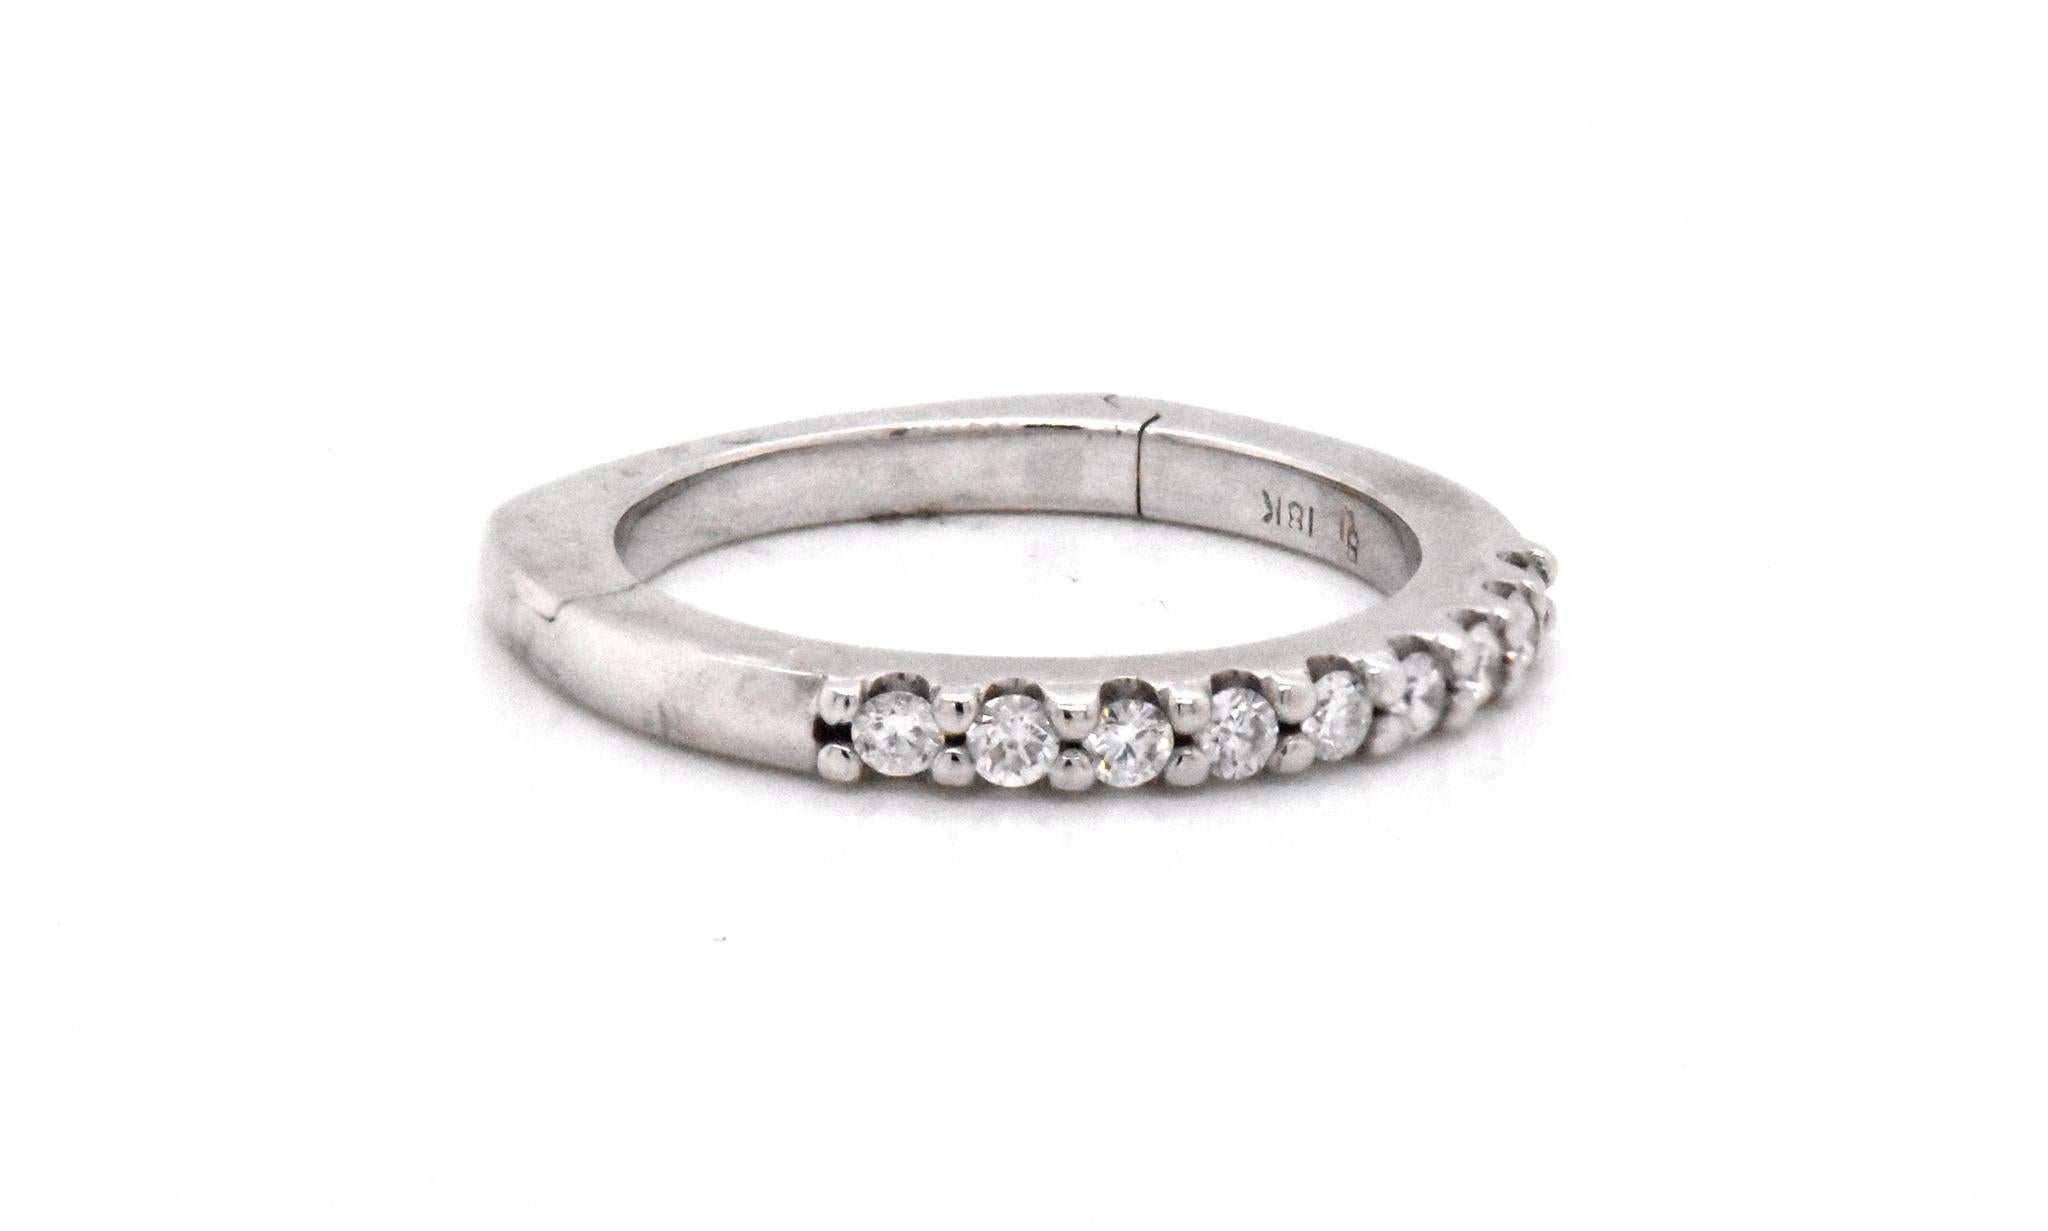 Designer: custom
Material: 18k white gold
Diamonds: 9 round cut = .18cttw
Color: G
Clarity: VS1
Size: 6.5 (please allow two additional shipping days for sizing requests)  
Dimensions: ring measures 2.2mm in width
Weight: 4.39 grams
